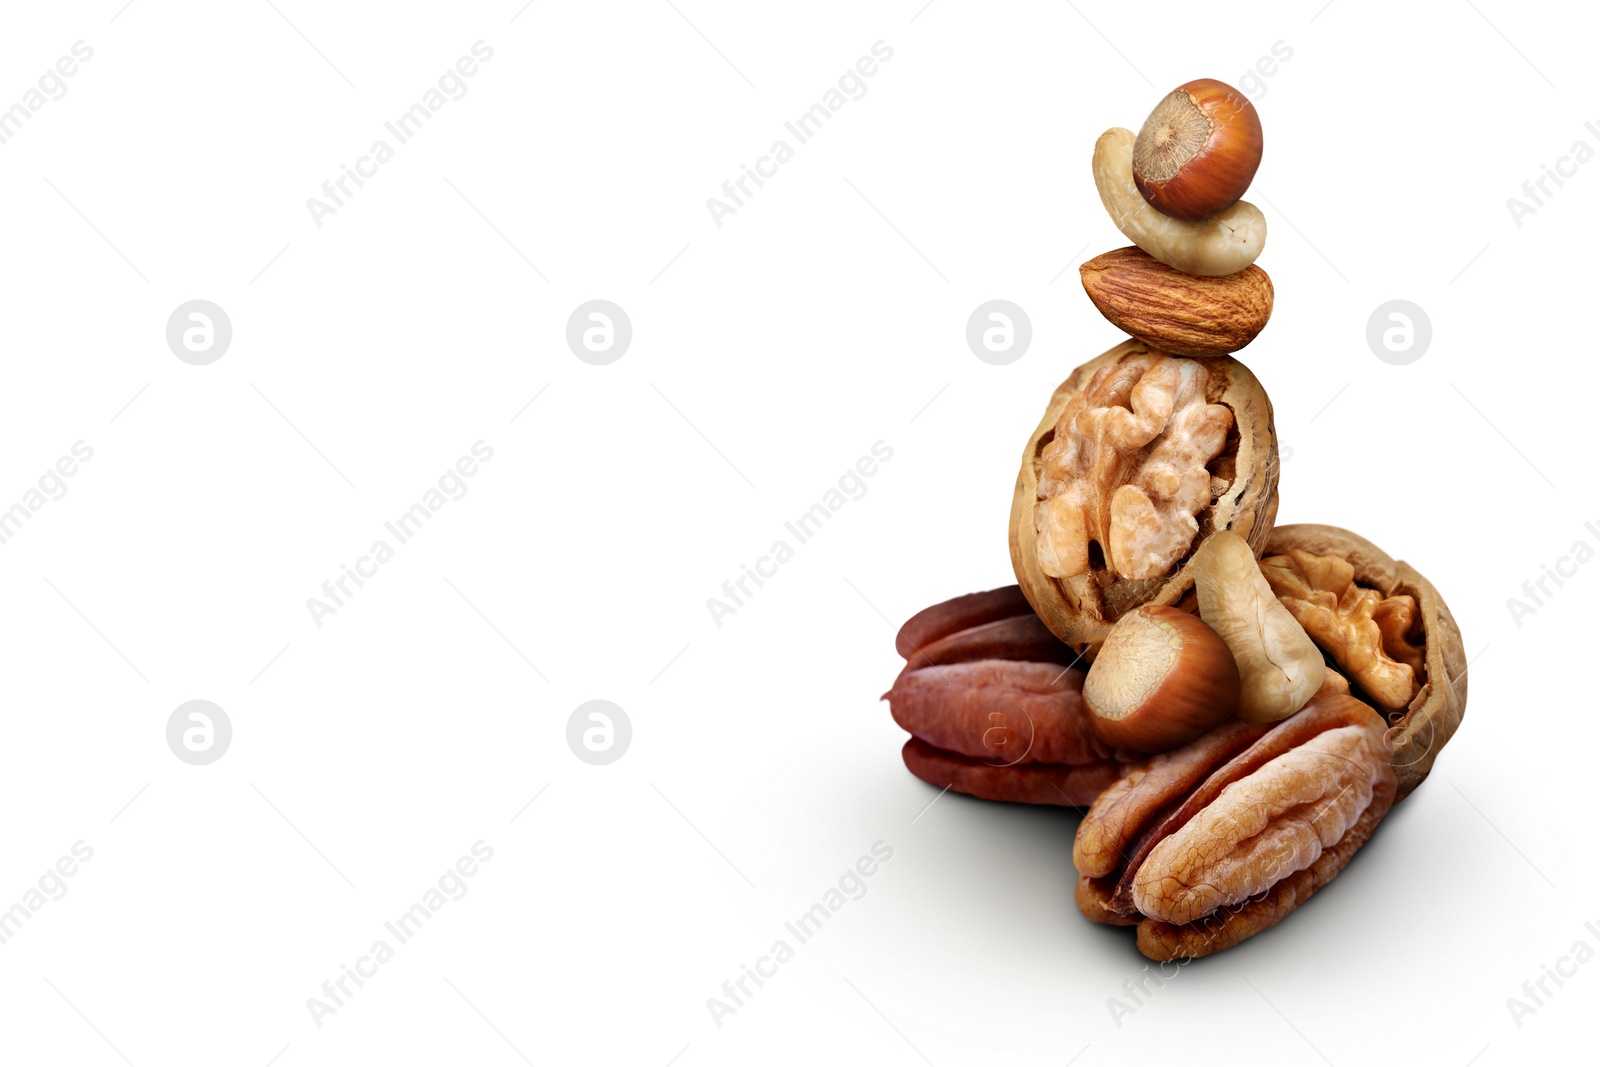 Image of Many different nuts on white background. Hazelnut, cashew, almond, walnut and pecan